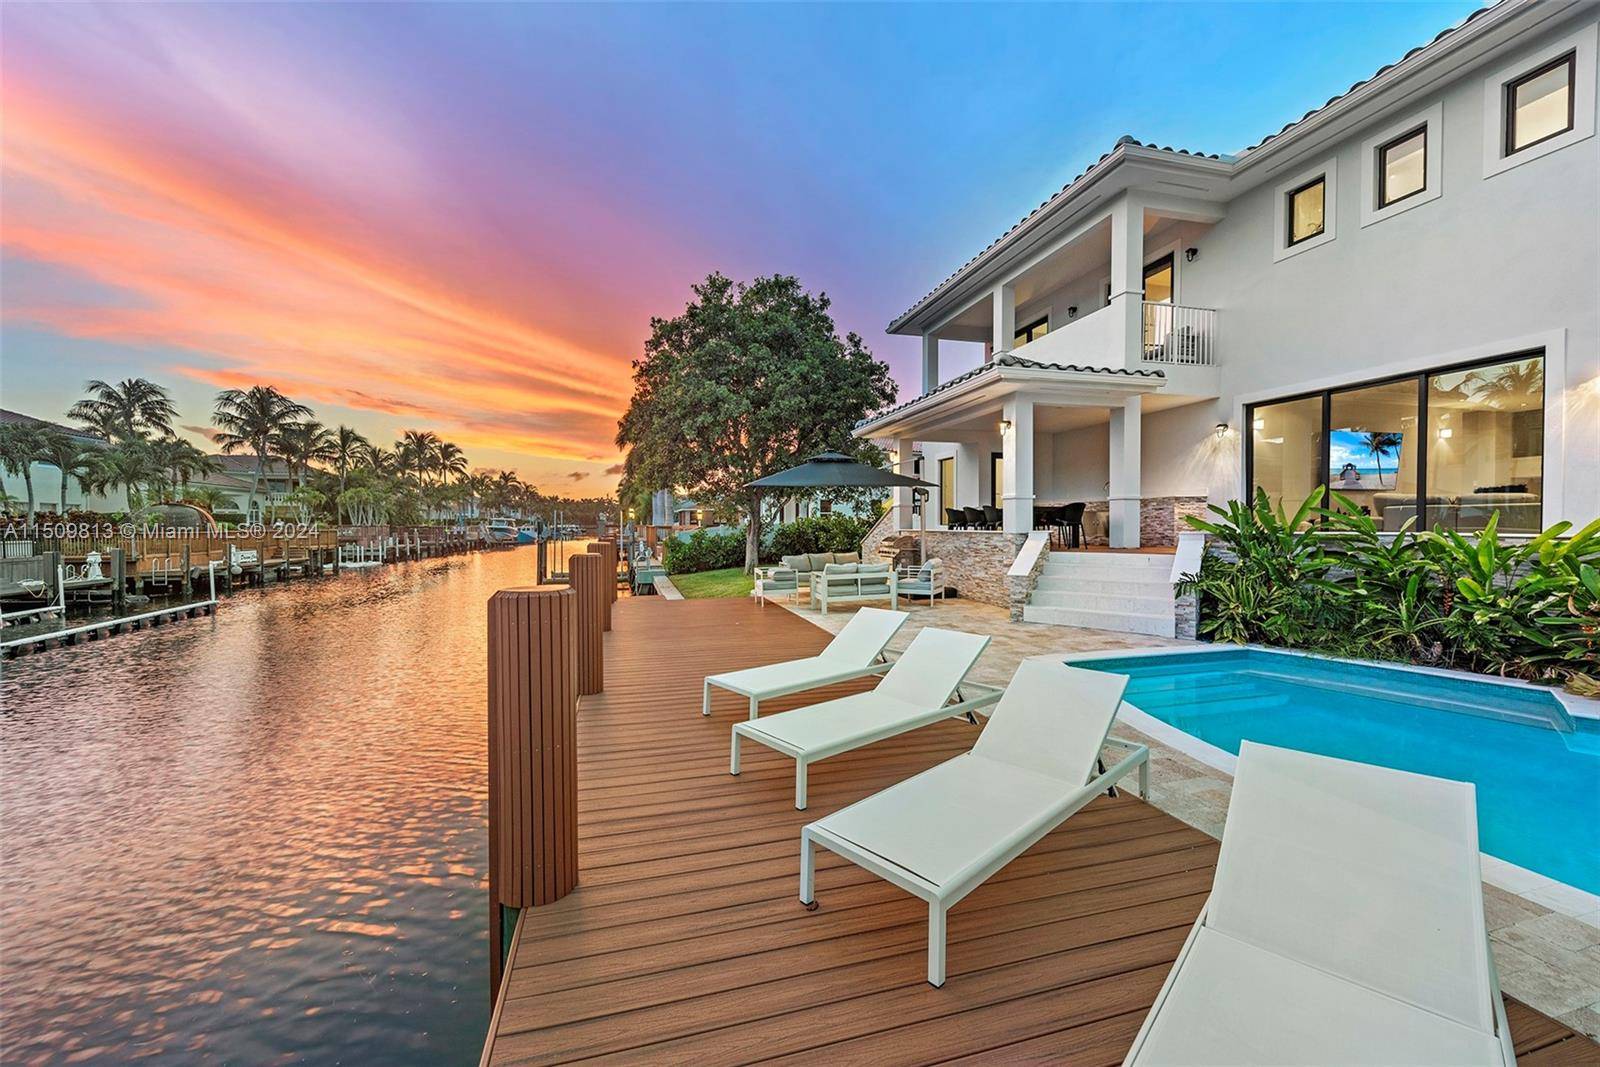 Built in 2021 This beautifully designed home is located in an exclusive area of South Lake in Hollywood Beach on a 100 waterfront lot with direct ocean access seconds away ...